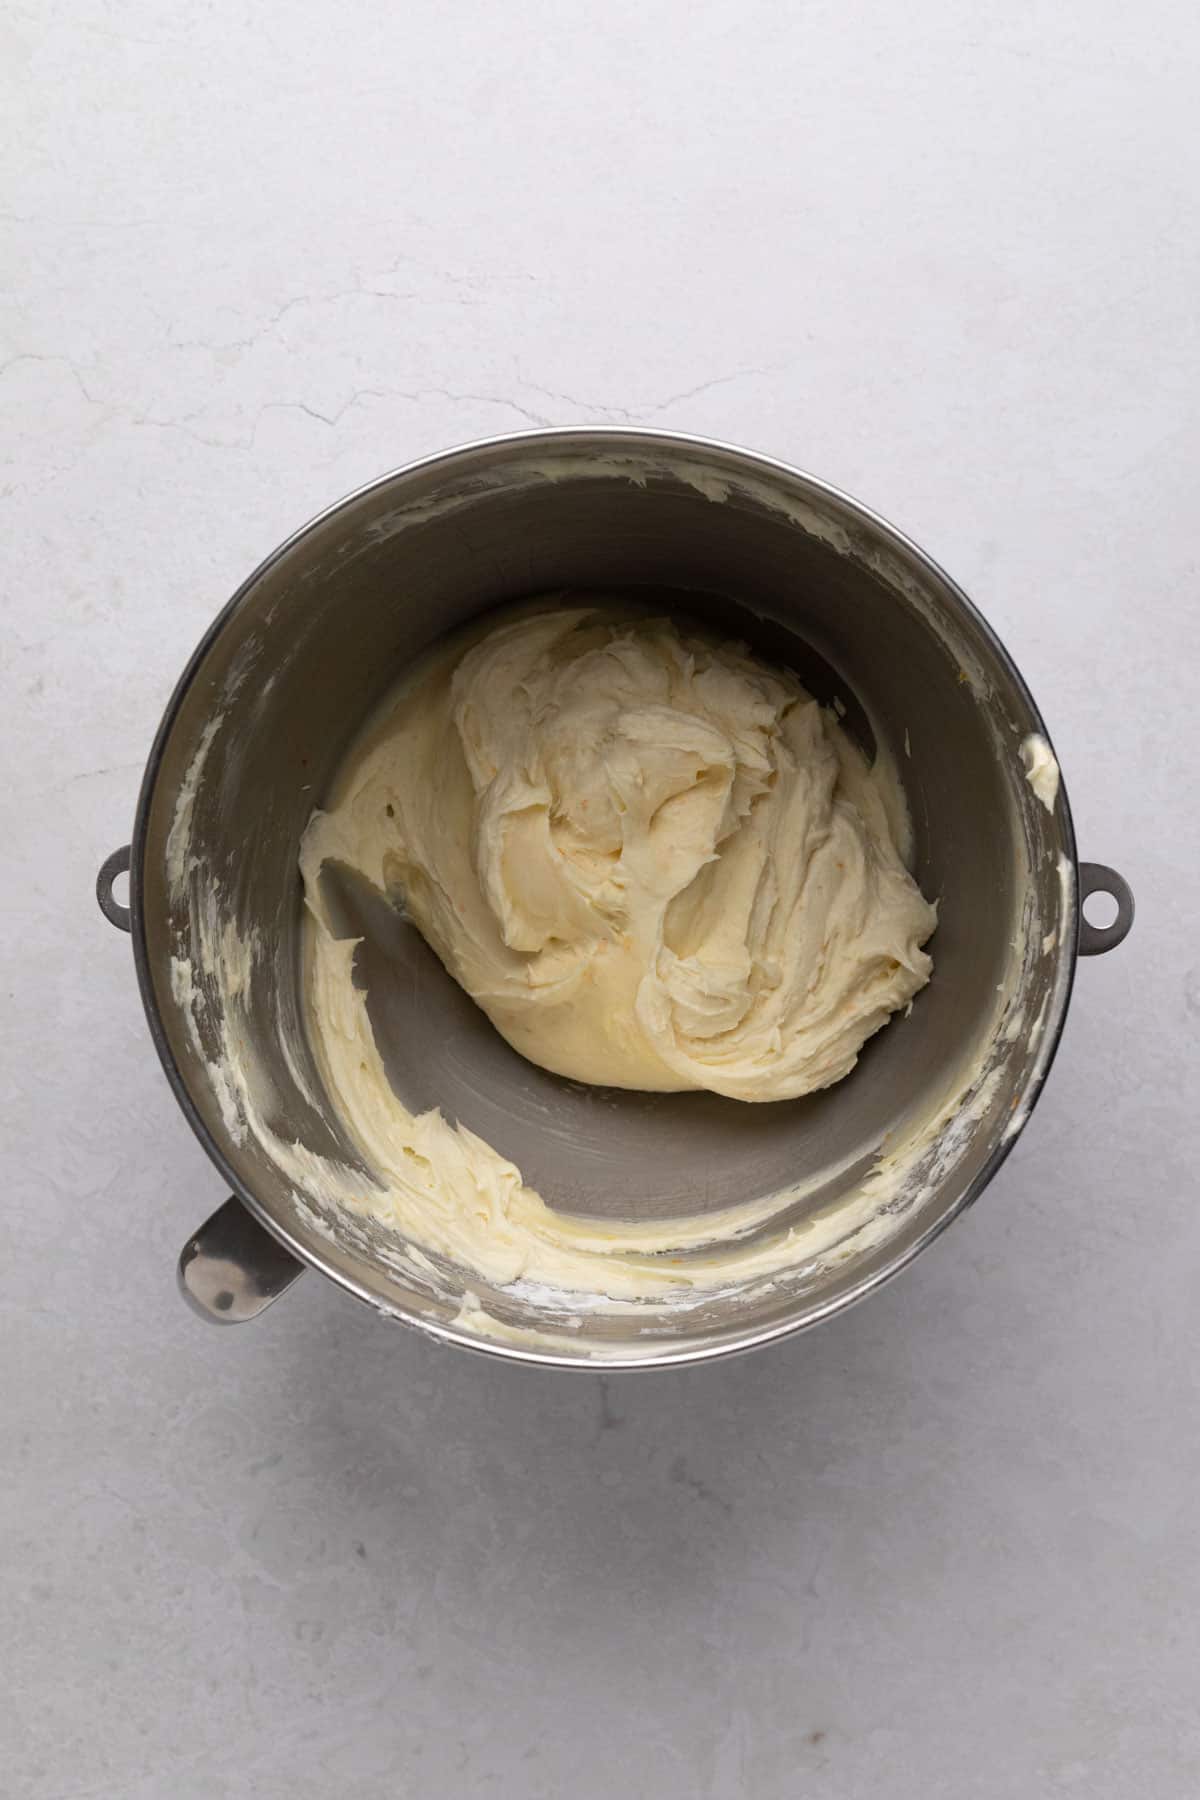 Orange cream cheese frosting mixed in a metal stand mixer bowl.